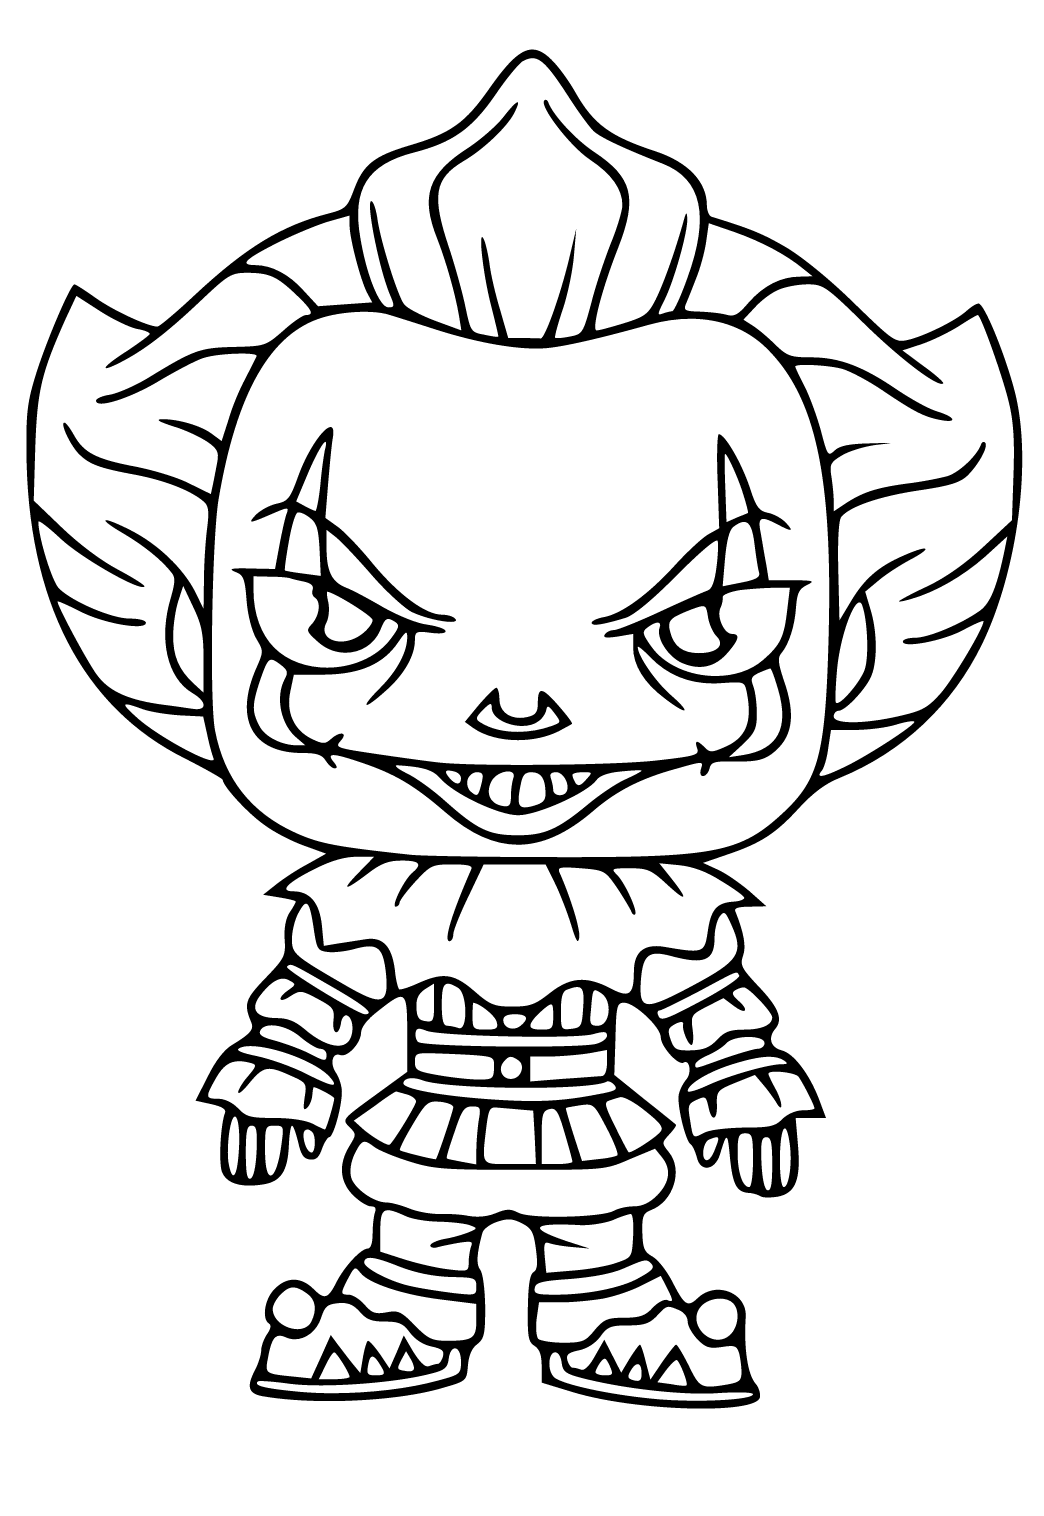 Free printable pennywise baby coloring page for adults and kids